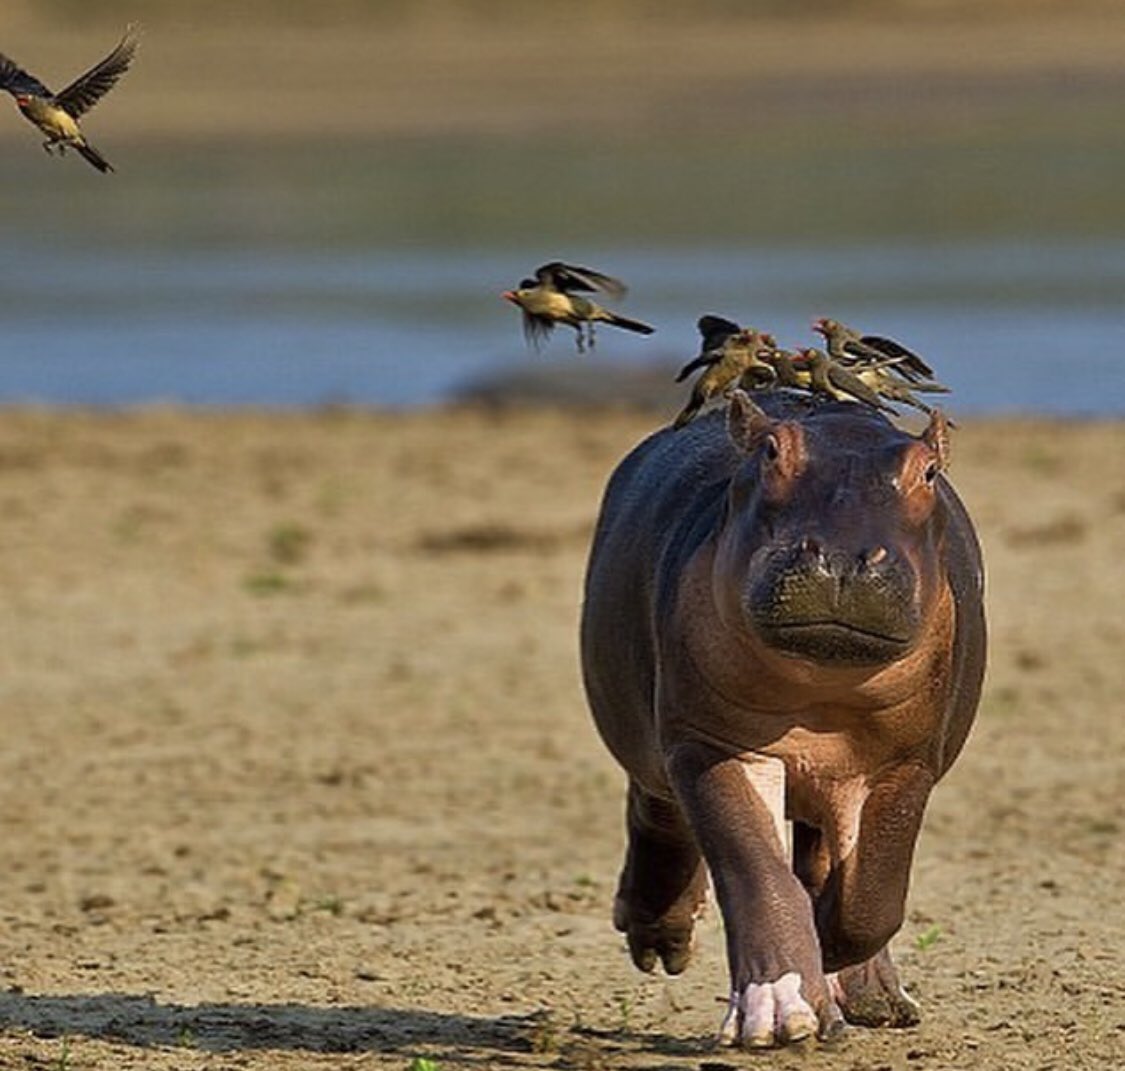 Twitter 上的bekka supp："This baby hippo being scared by birds is highly relatable. https://t.co/NSxbySQ8cN" / Twitter